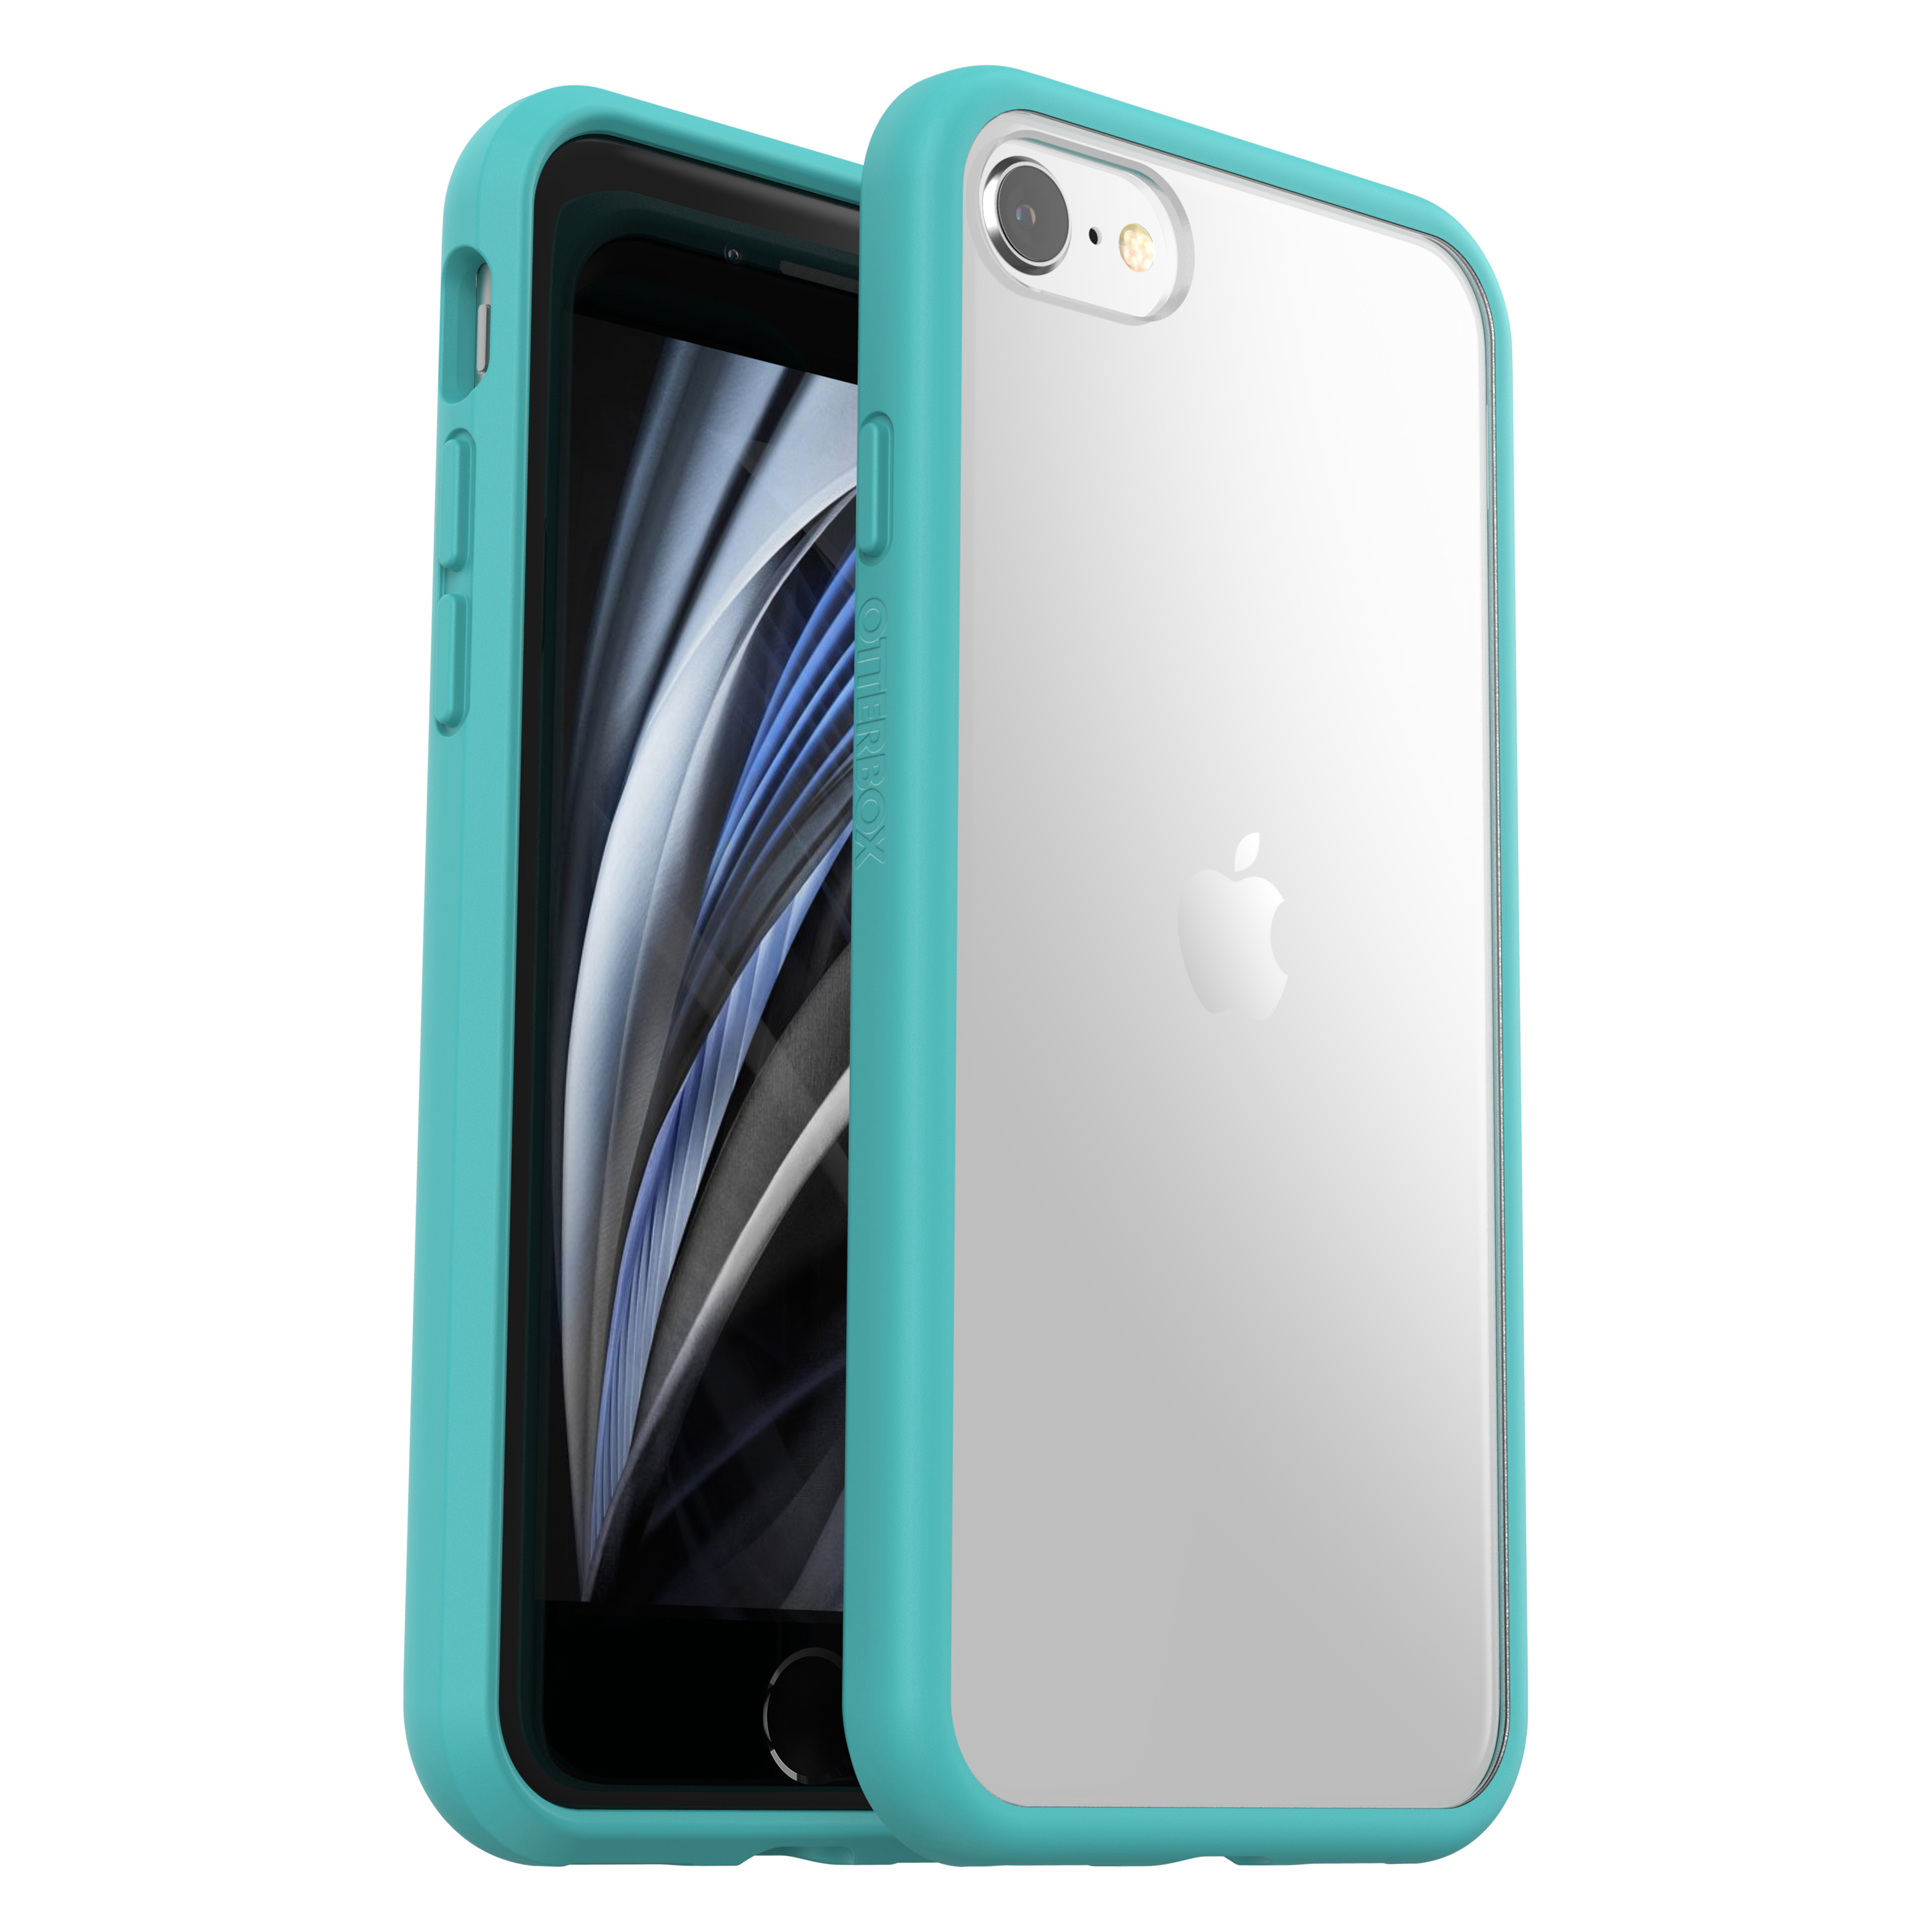 iPhone gen), Transparent/Blau (2nd React, Backcover, SE Apple, 8, iPhone OTTERBOX iPhone 7,